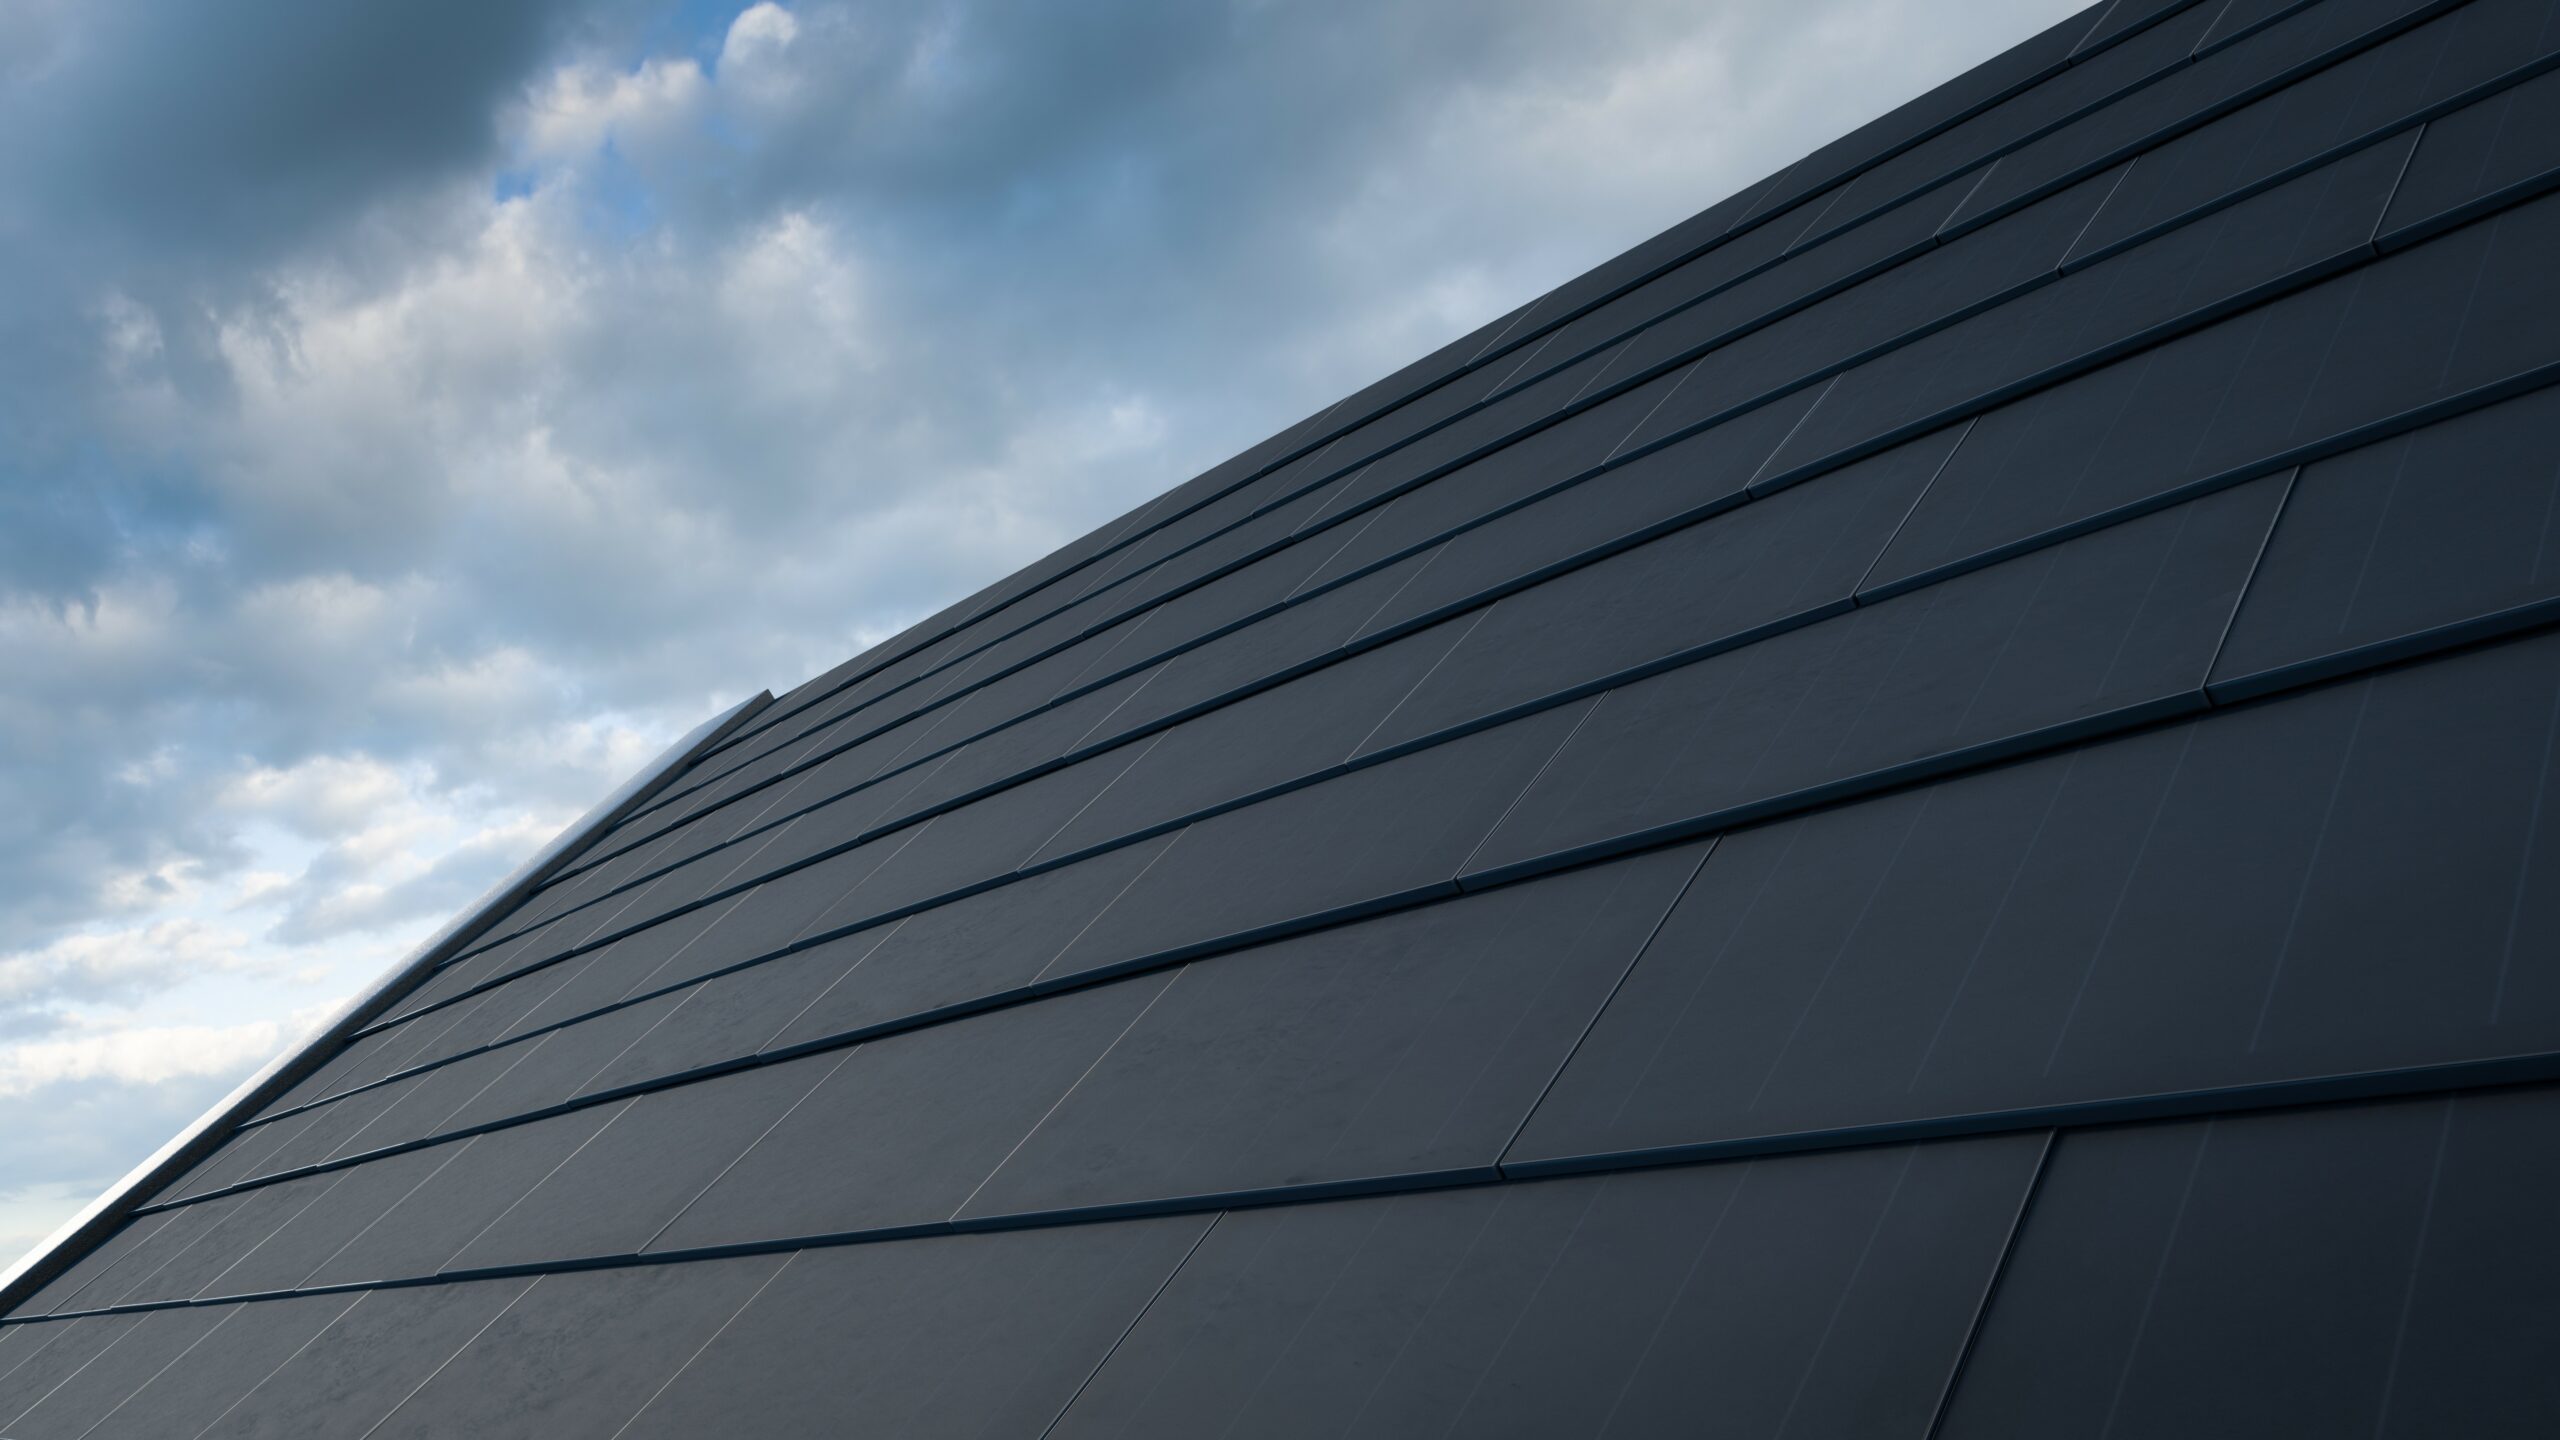 Solar roof tiles of a modern home